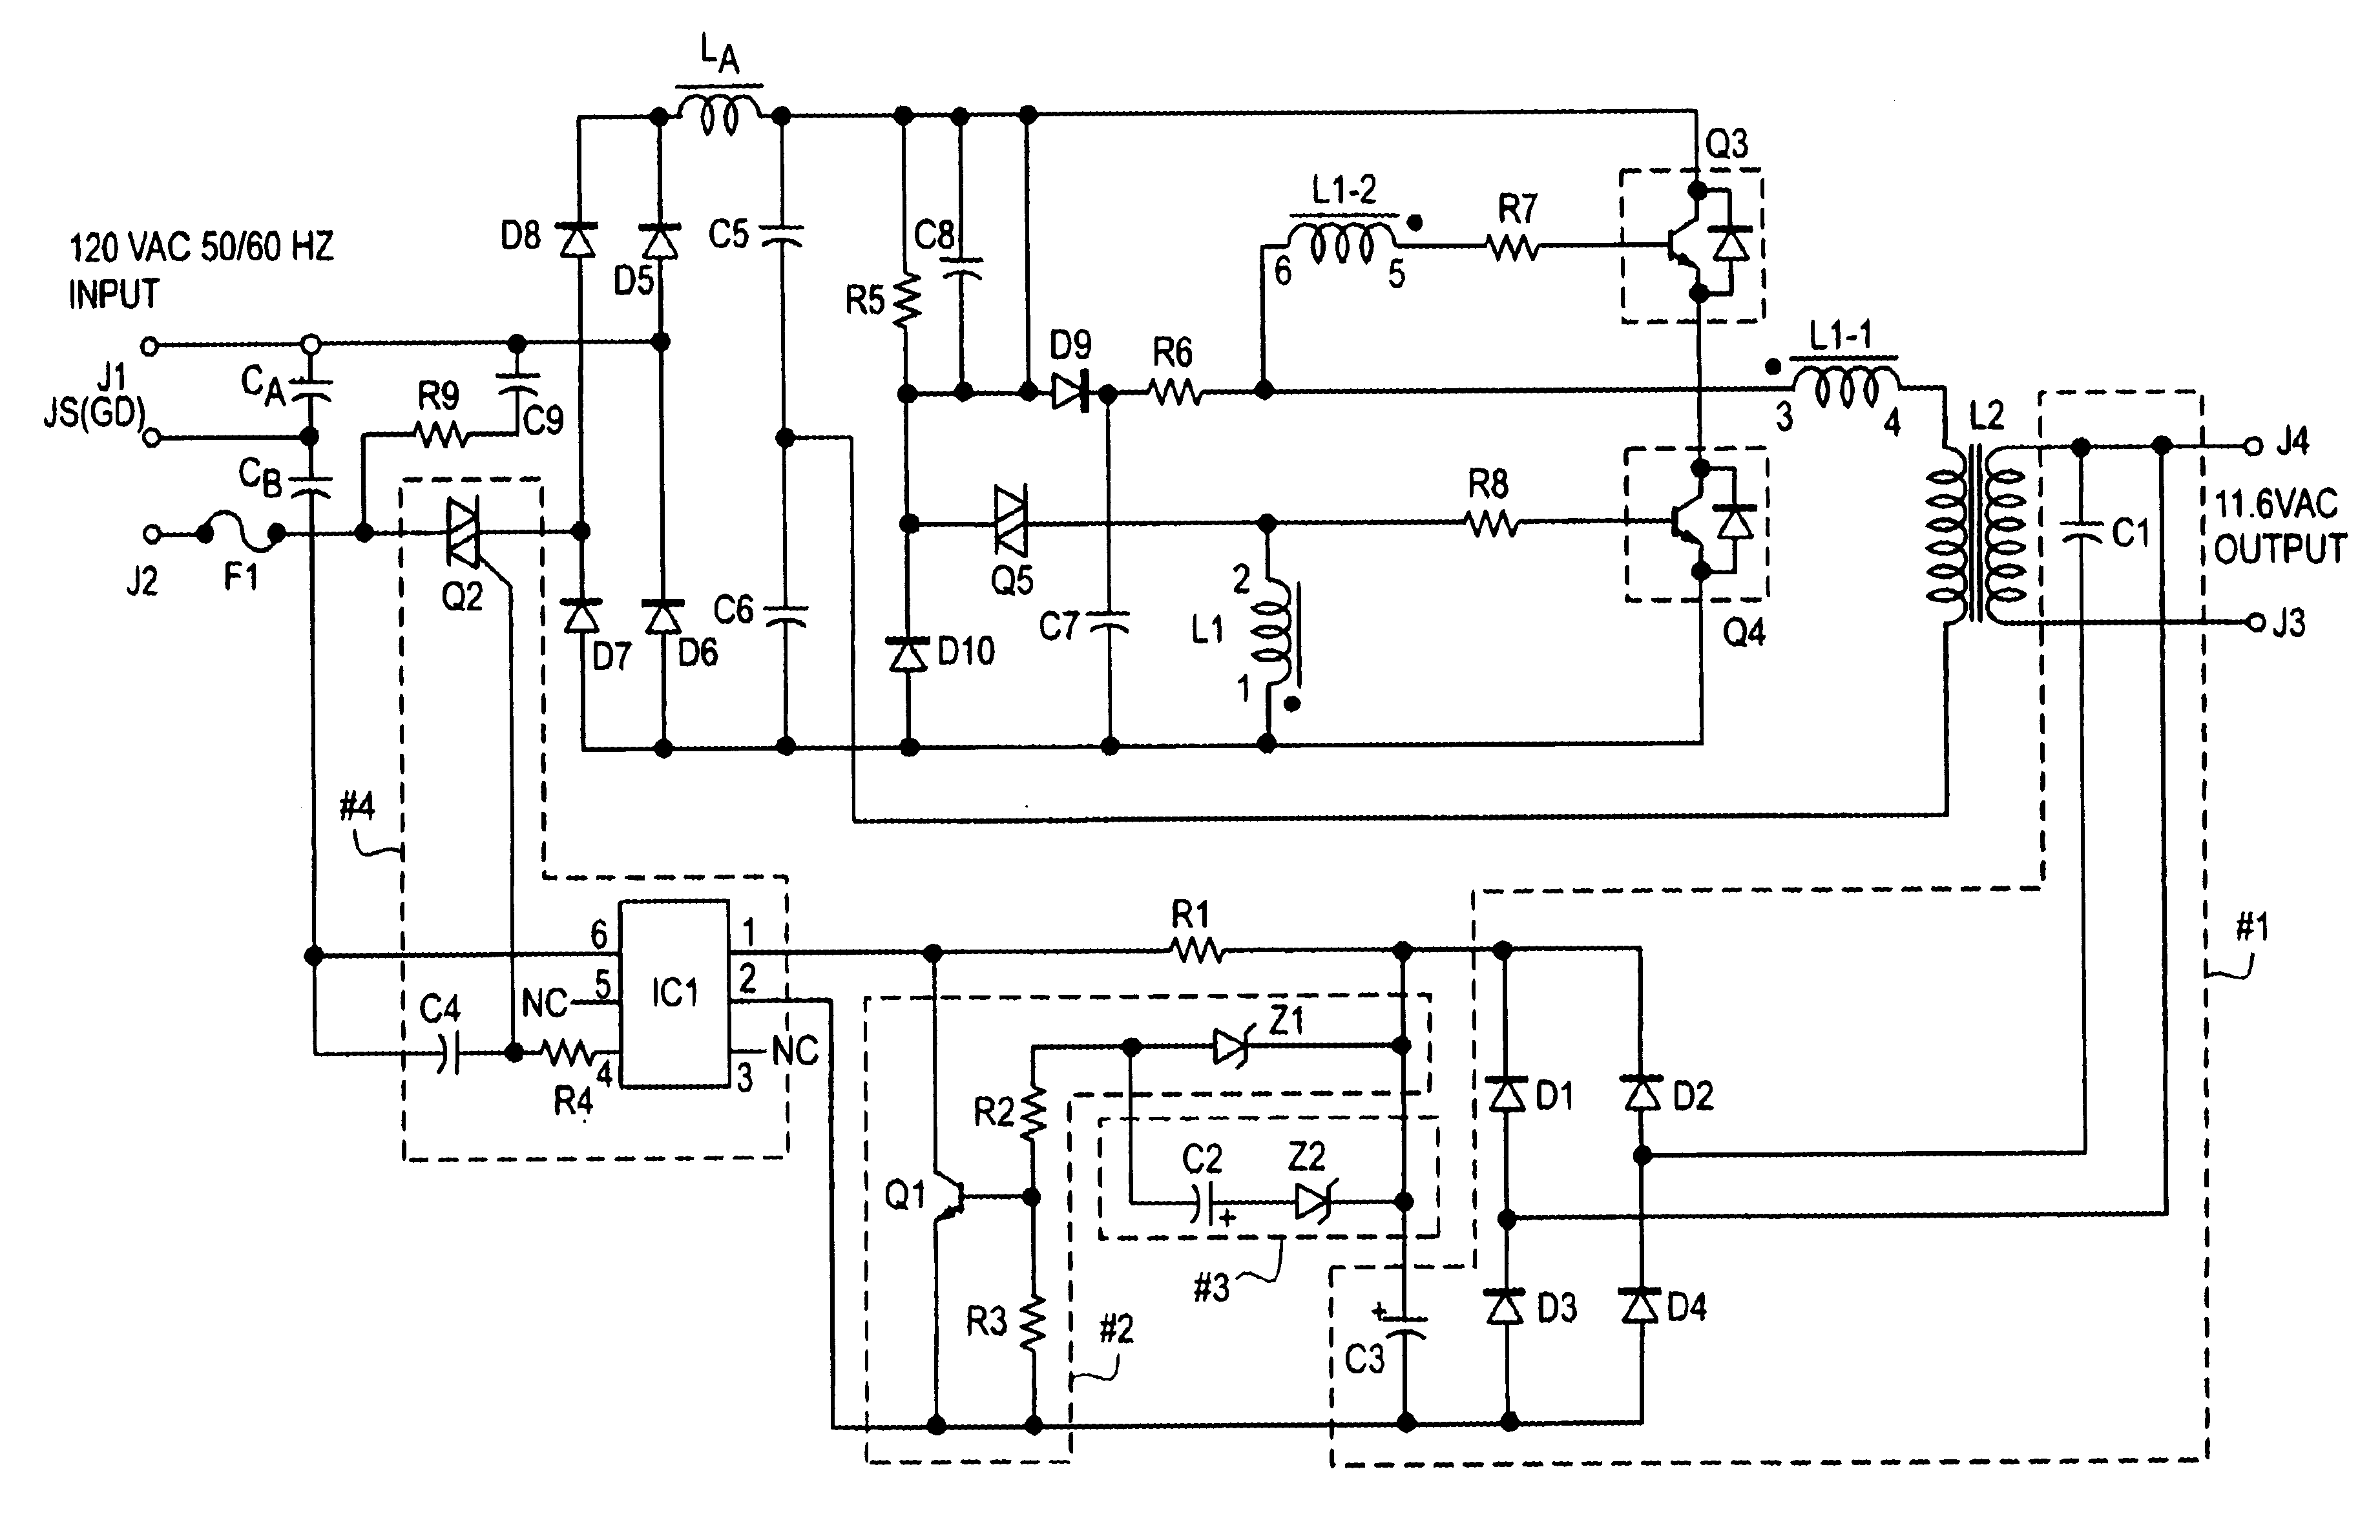 Voltage regulator for line powered linear and switching power supply